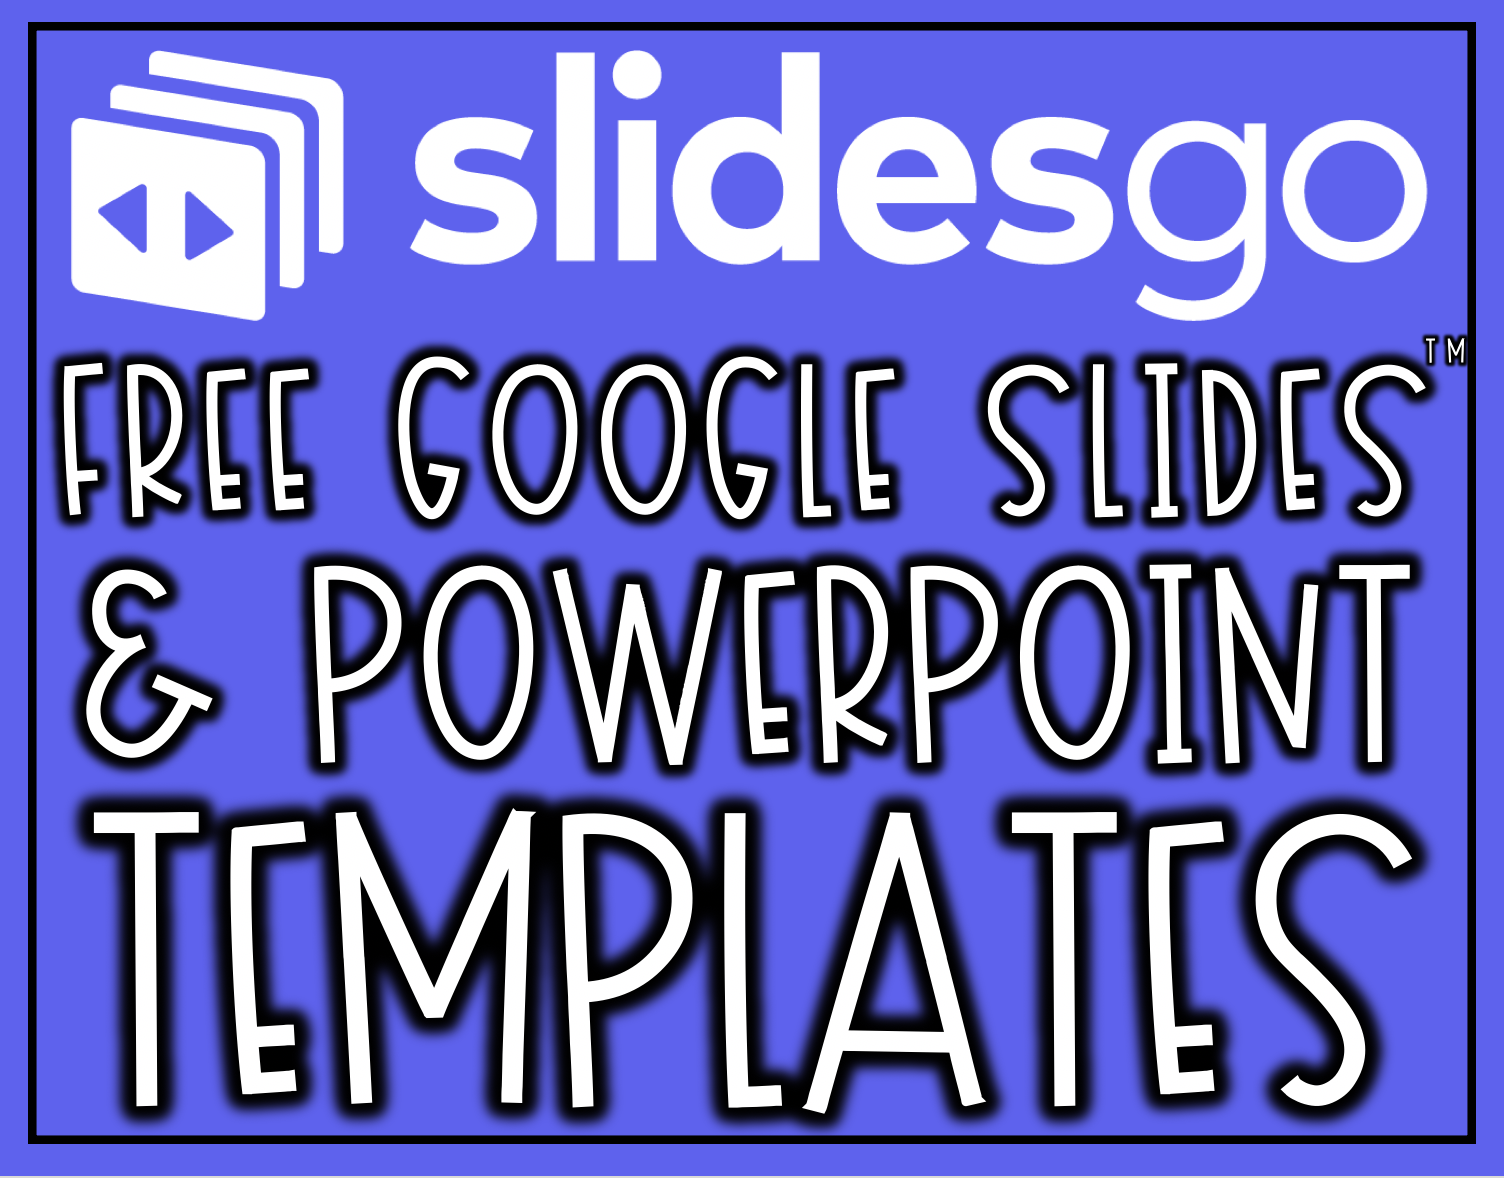 SlidesGo has free downloadable Google Slides and PowerPoint templates for education, business, marketing and even the medical field!